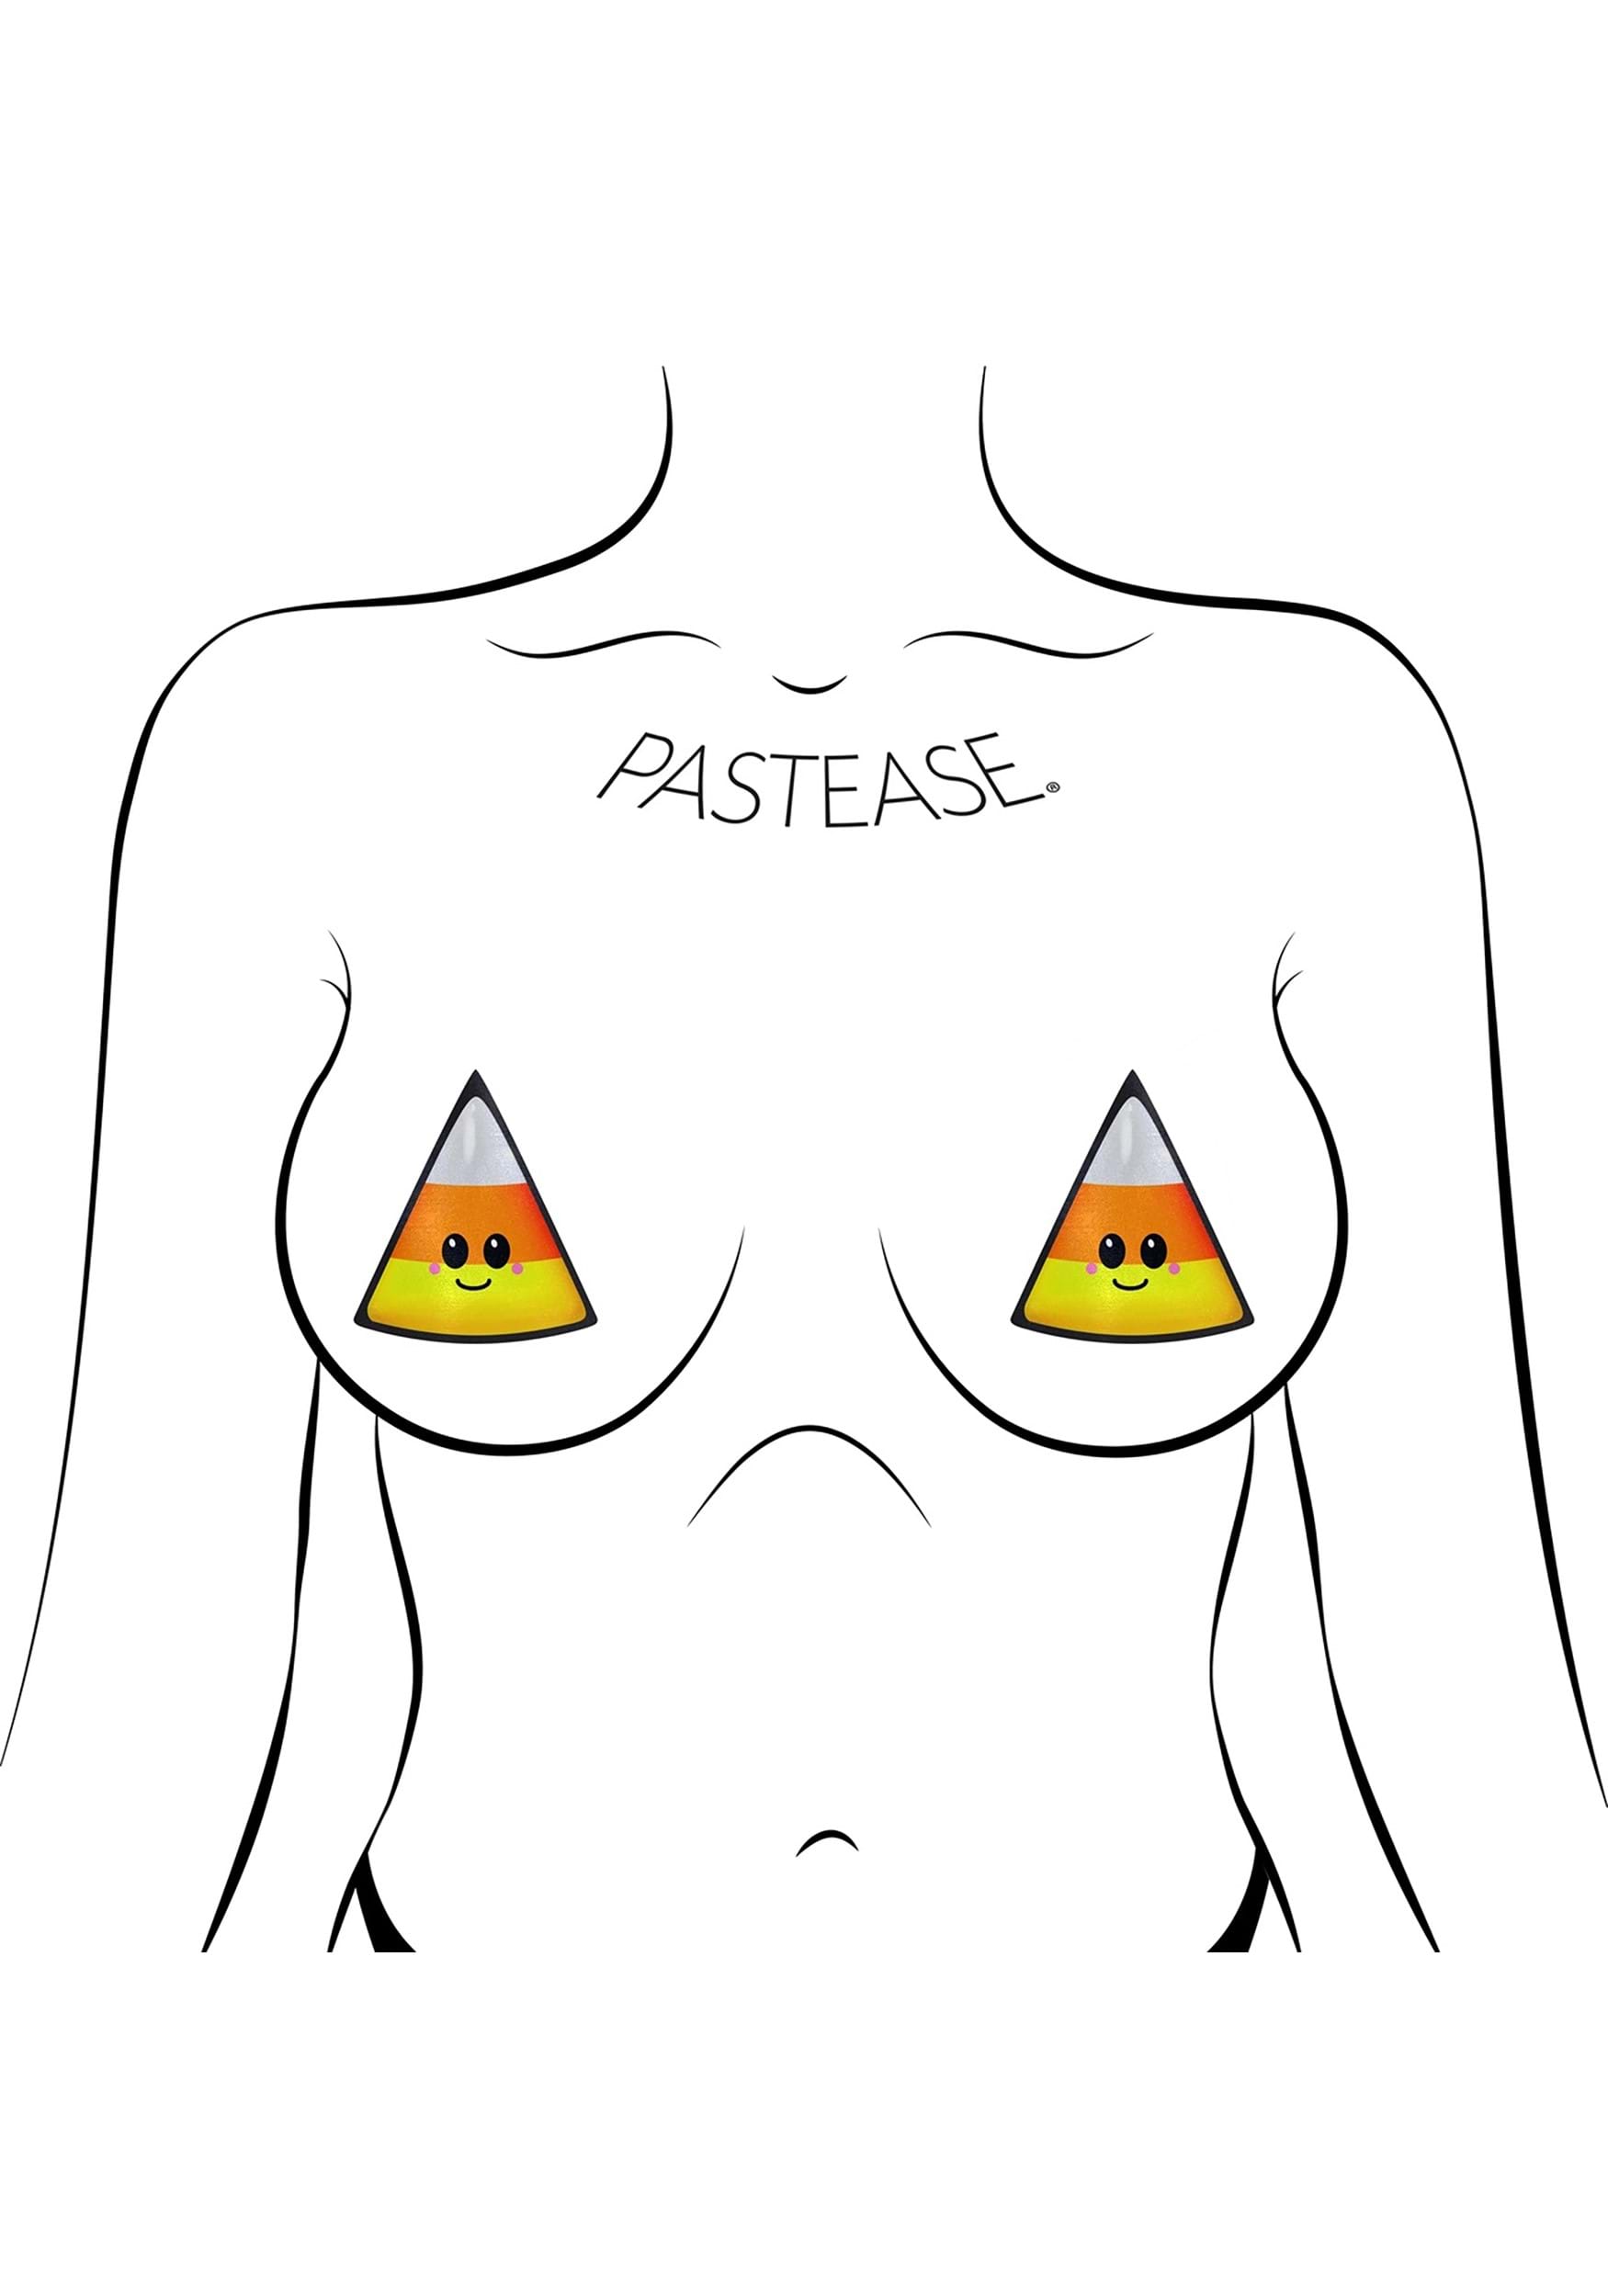 Pastease Candy Corn Costume Pasties